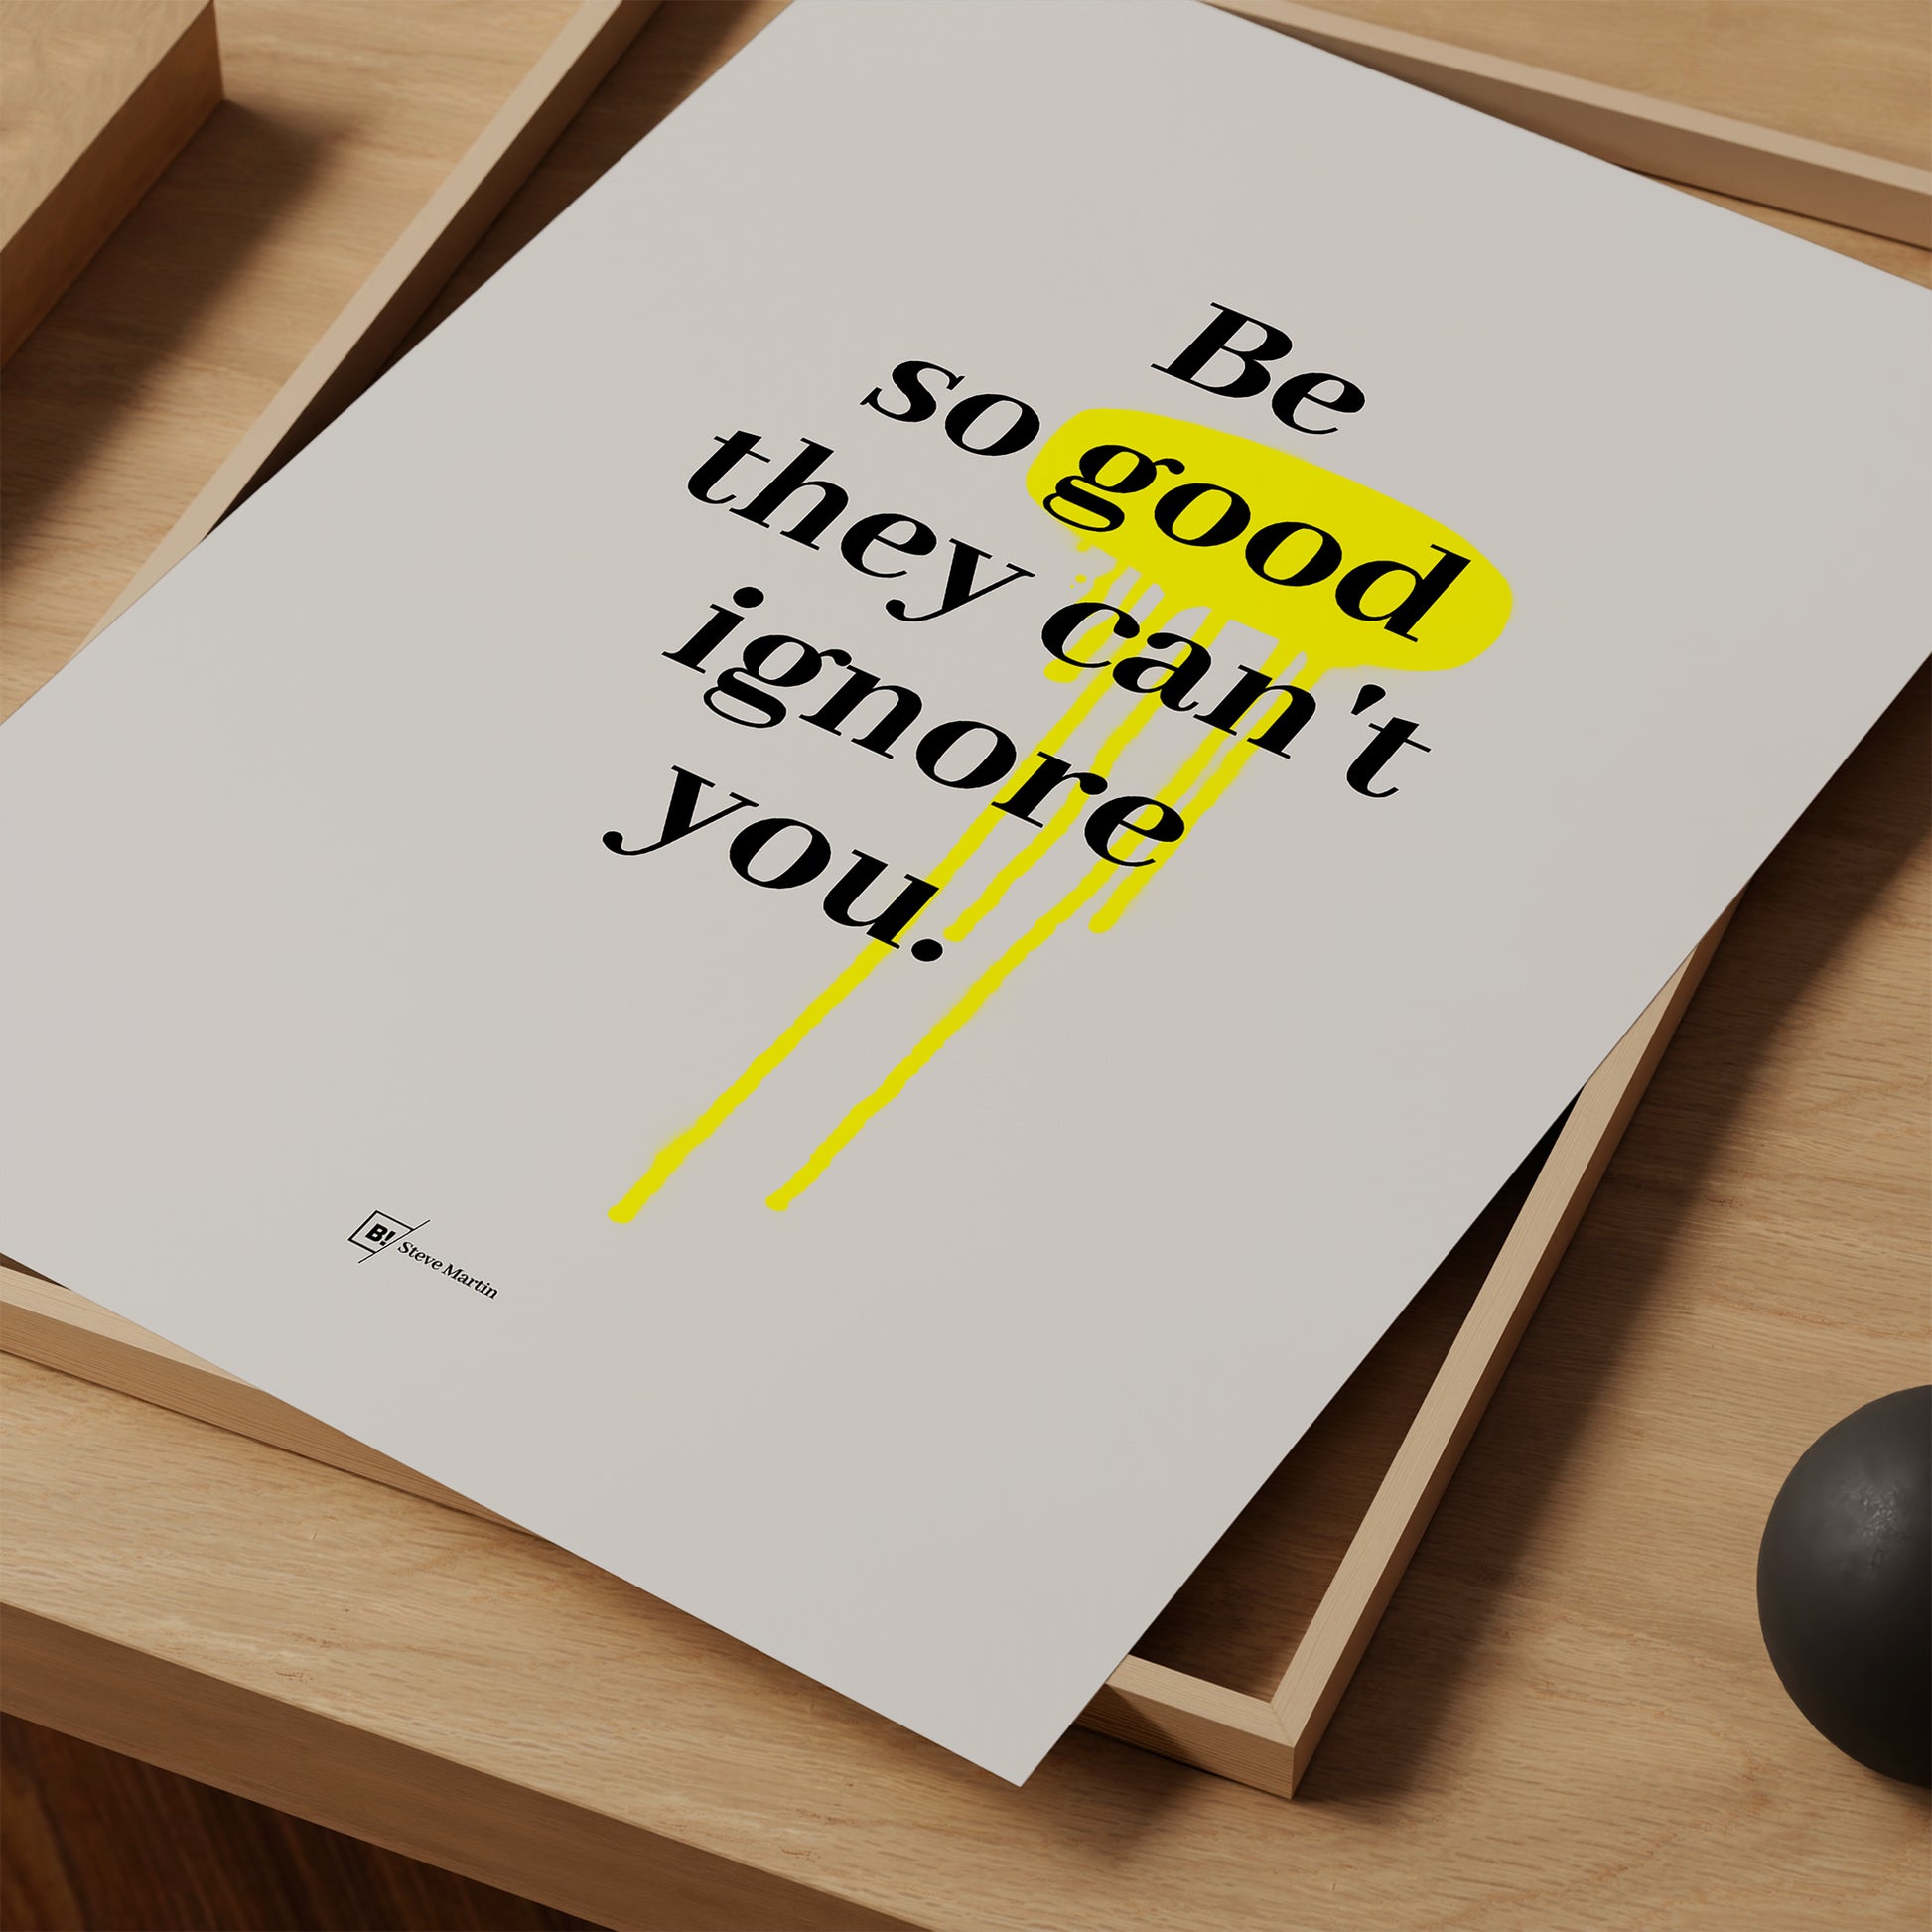 Be inspired by Steve Martin's famous "Be so good they can't ignore you" quote art print. This artwork was printed using giclée on archival acid-free paper and is presented as a print close-up that captures its timeless beauty in every detail.